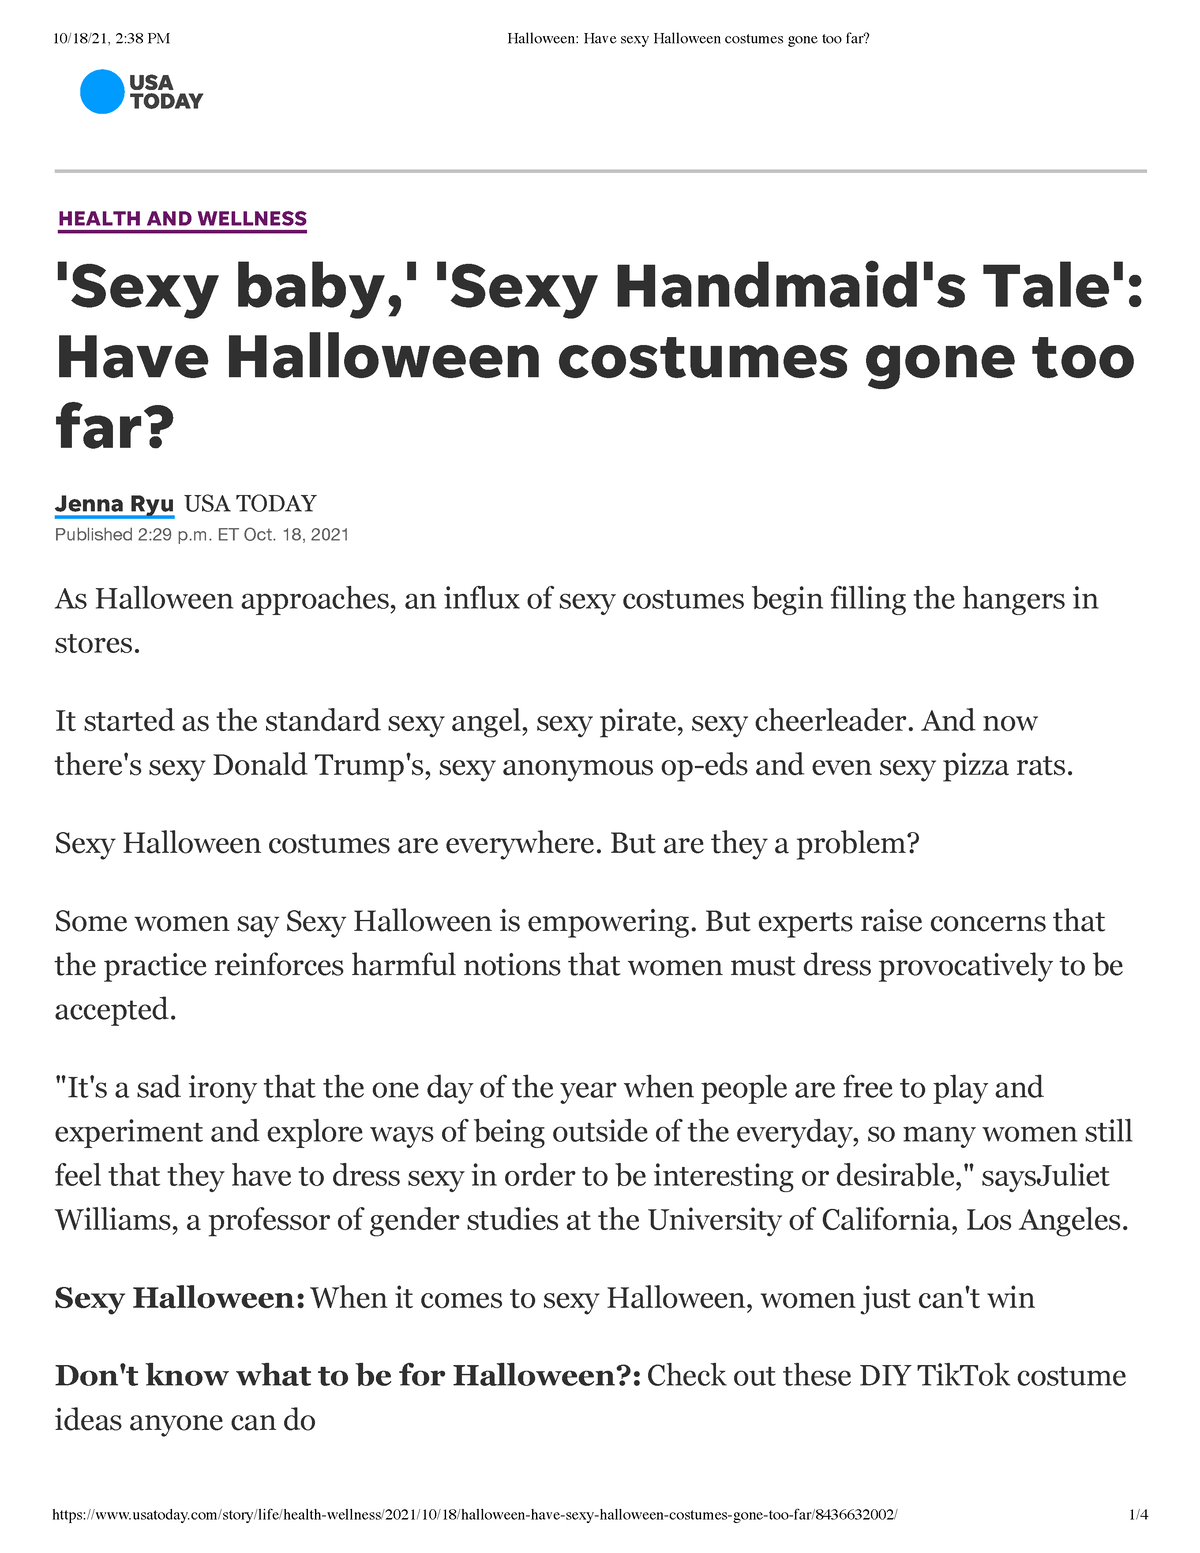 Halloween Have Sexy Halloween Costumes Gone Too Far Hyers And Hipple Health And Wellness Sexy